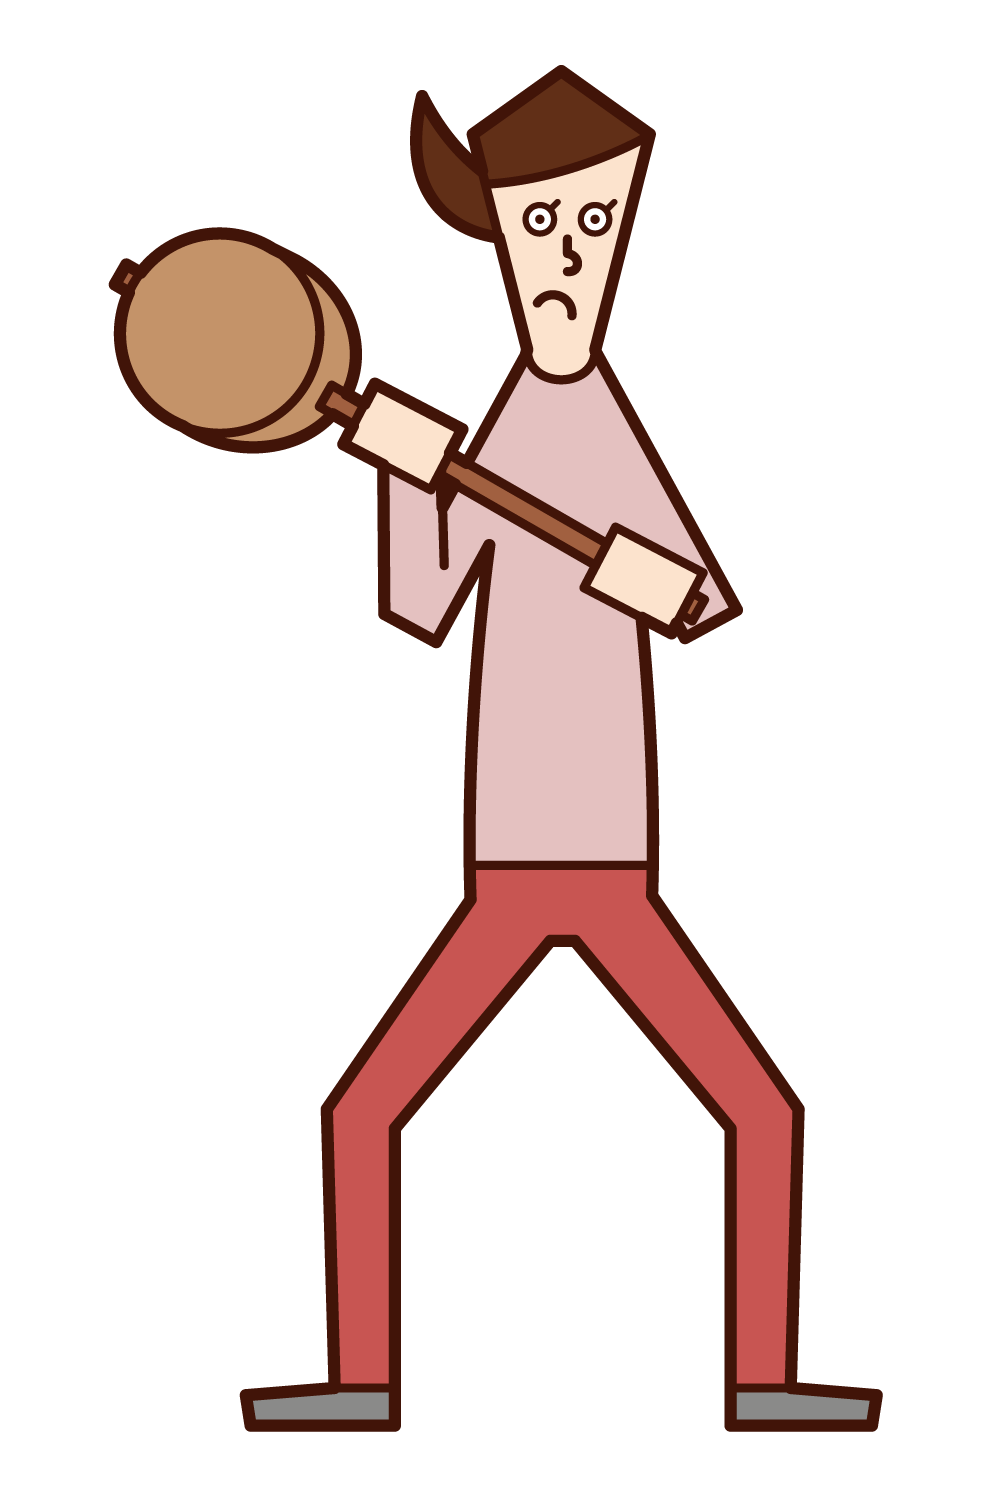 Illustration of a woman using a hammer